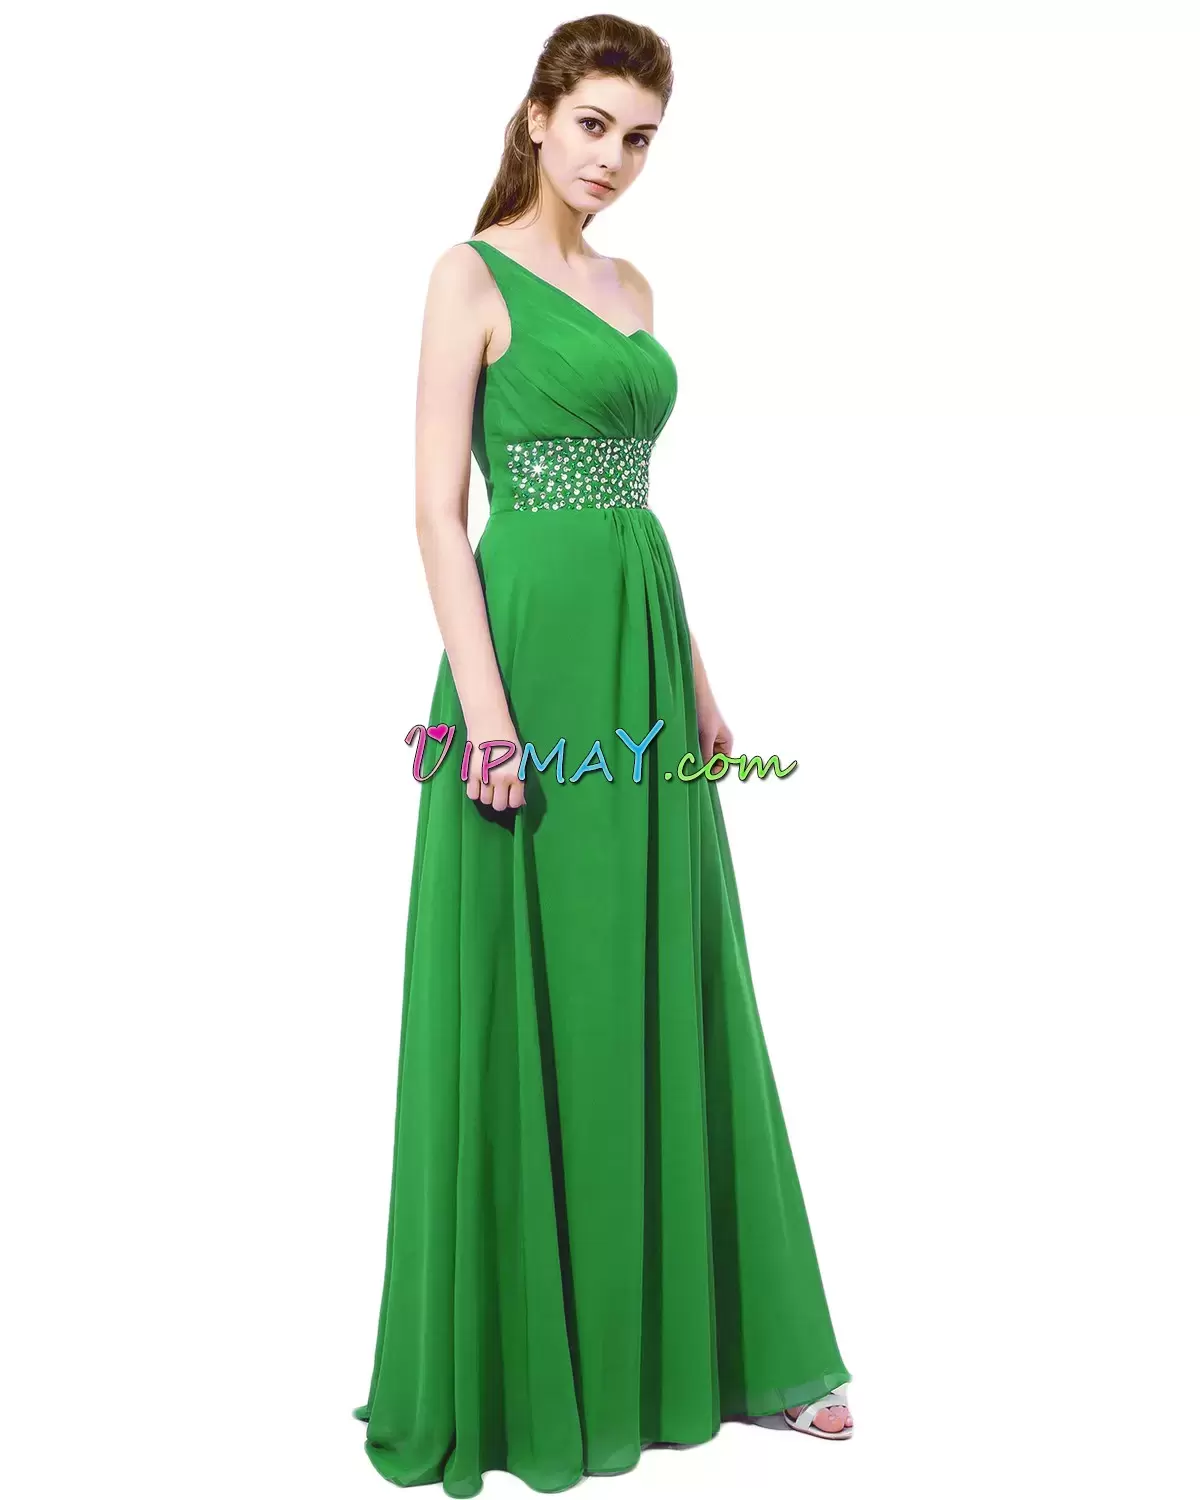 one shoulder homecoming dress,chiffon mother of the groom dress,chiffon party dress for womens,emerald green homecoming dress,